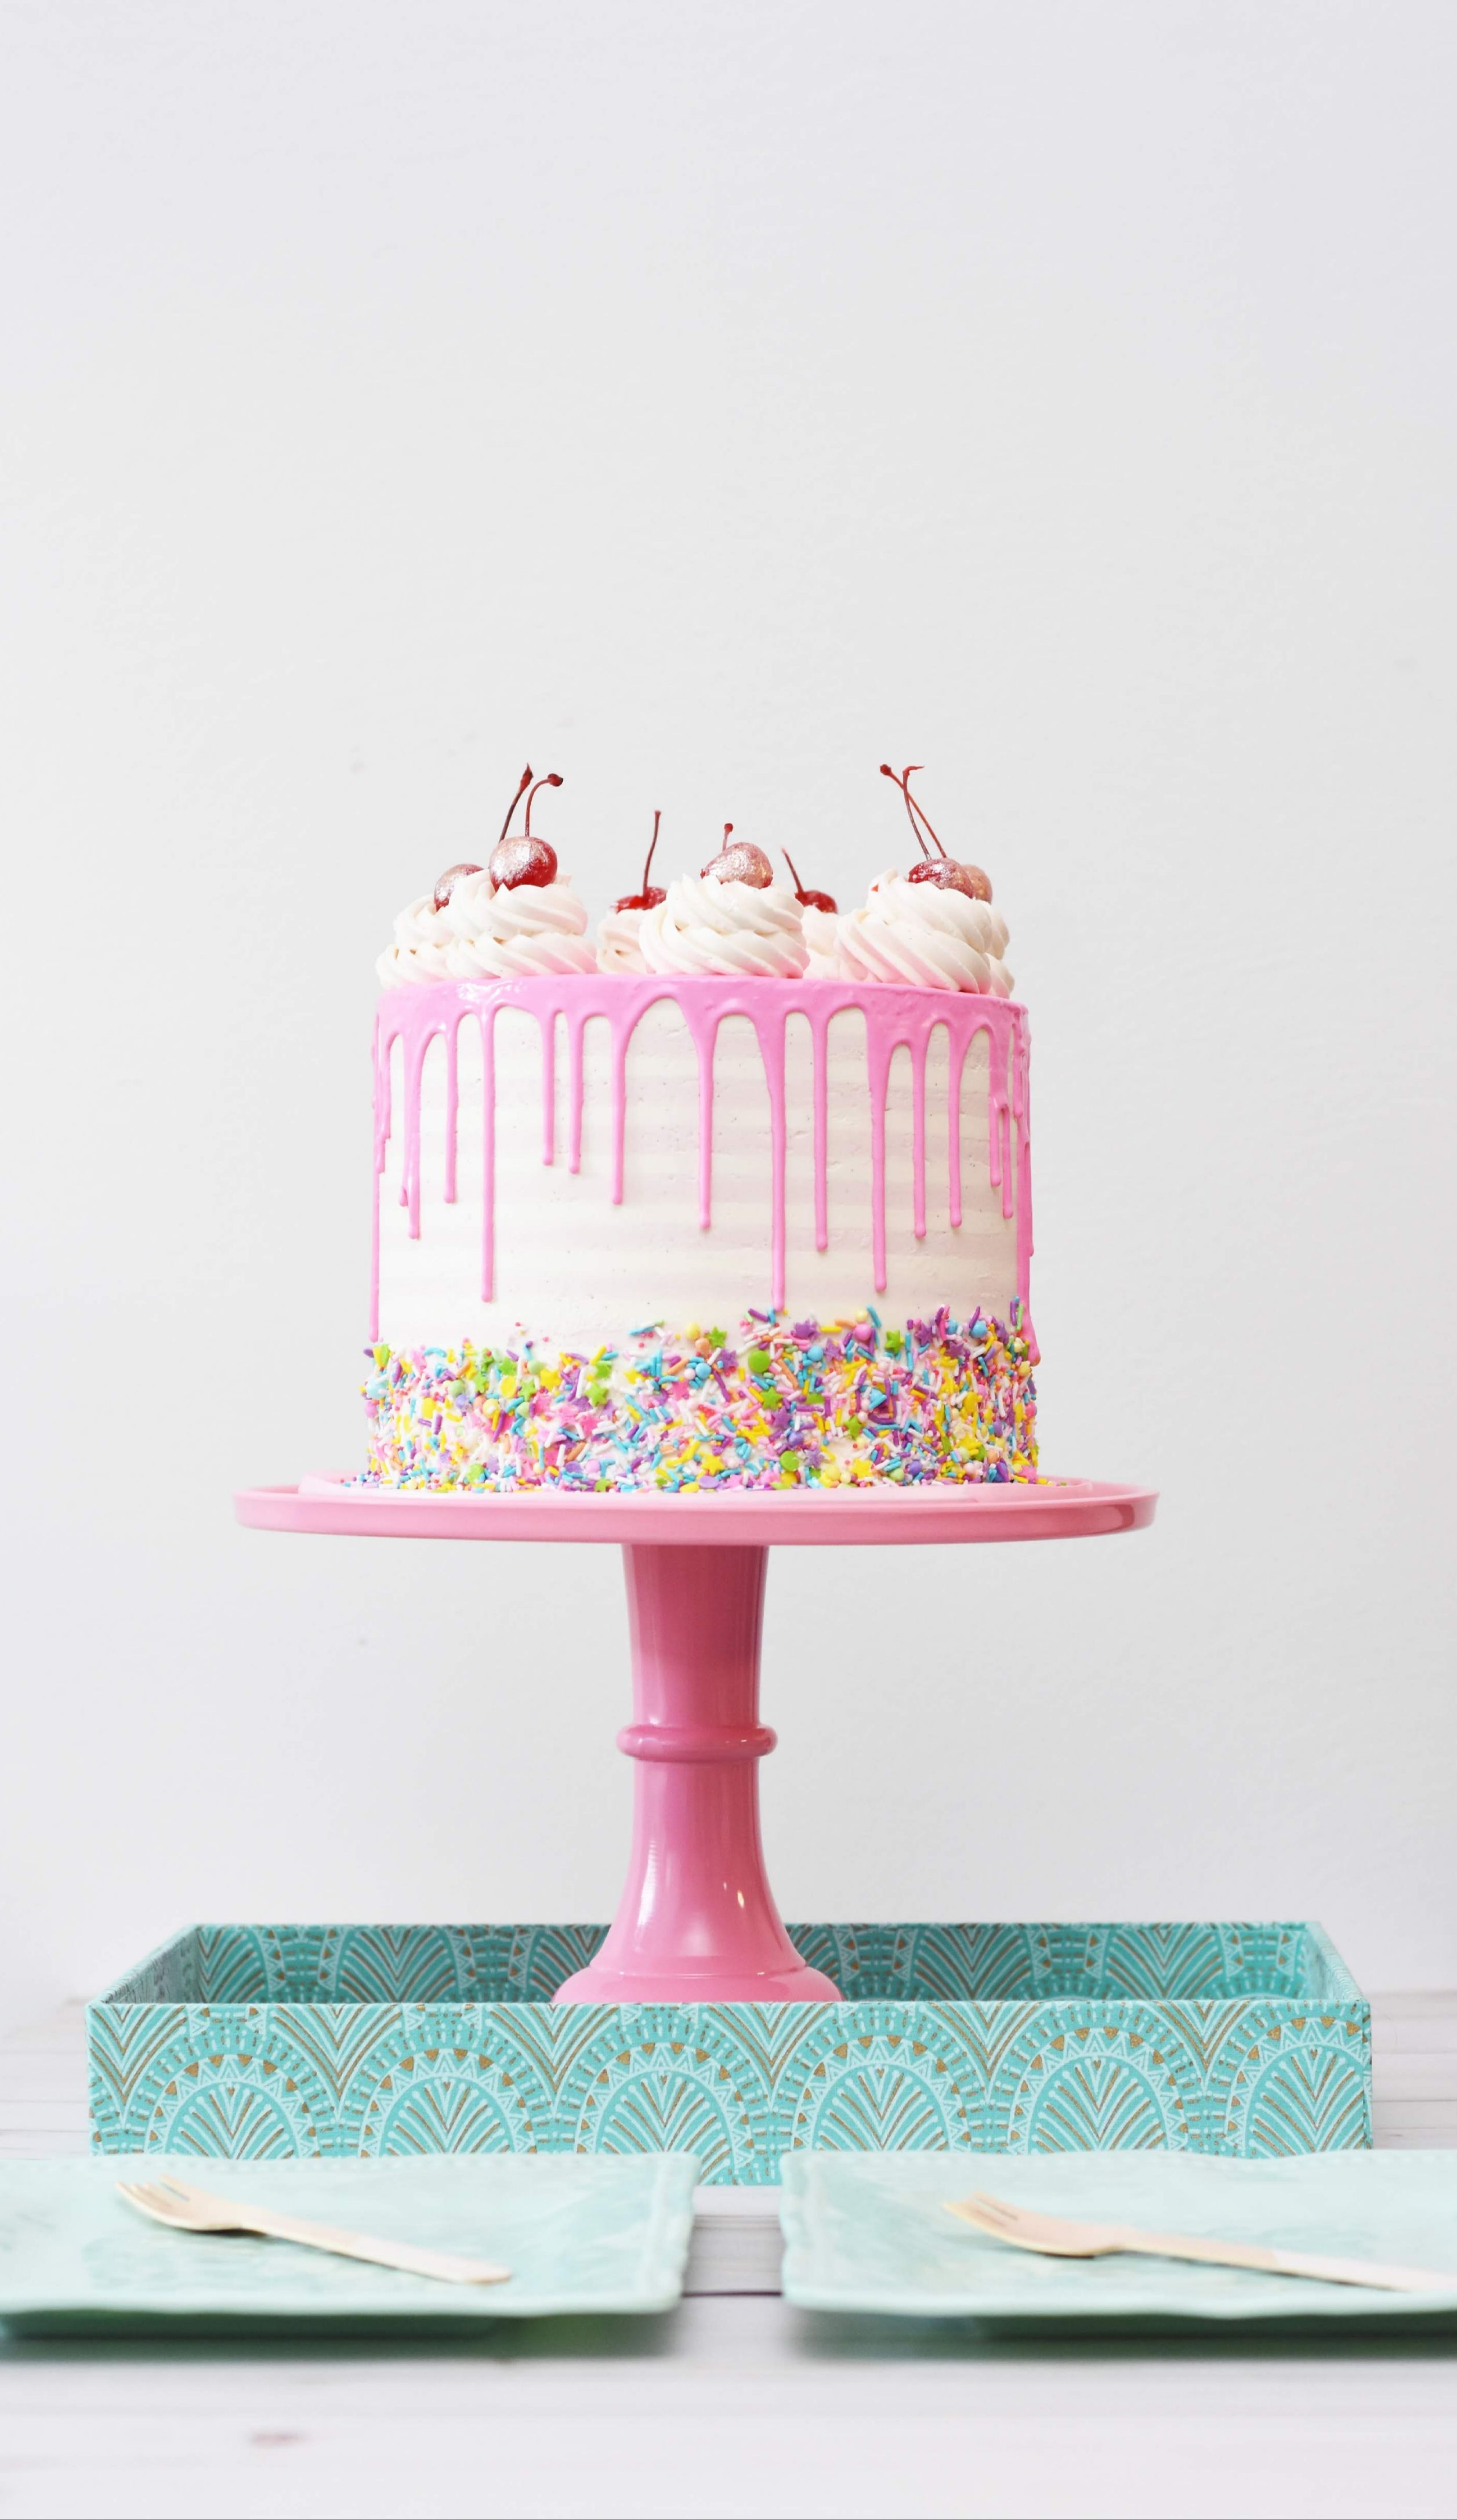 Birthday Cake Picture. Download Free Image